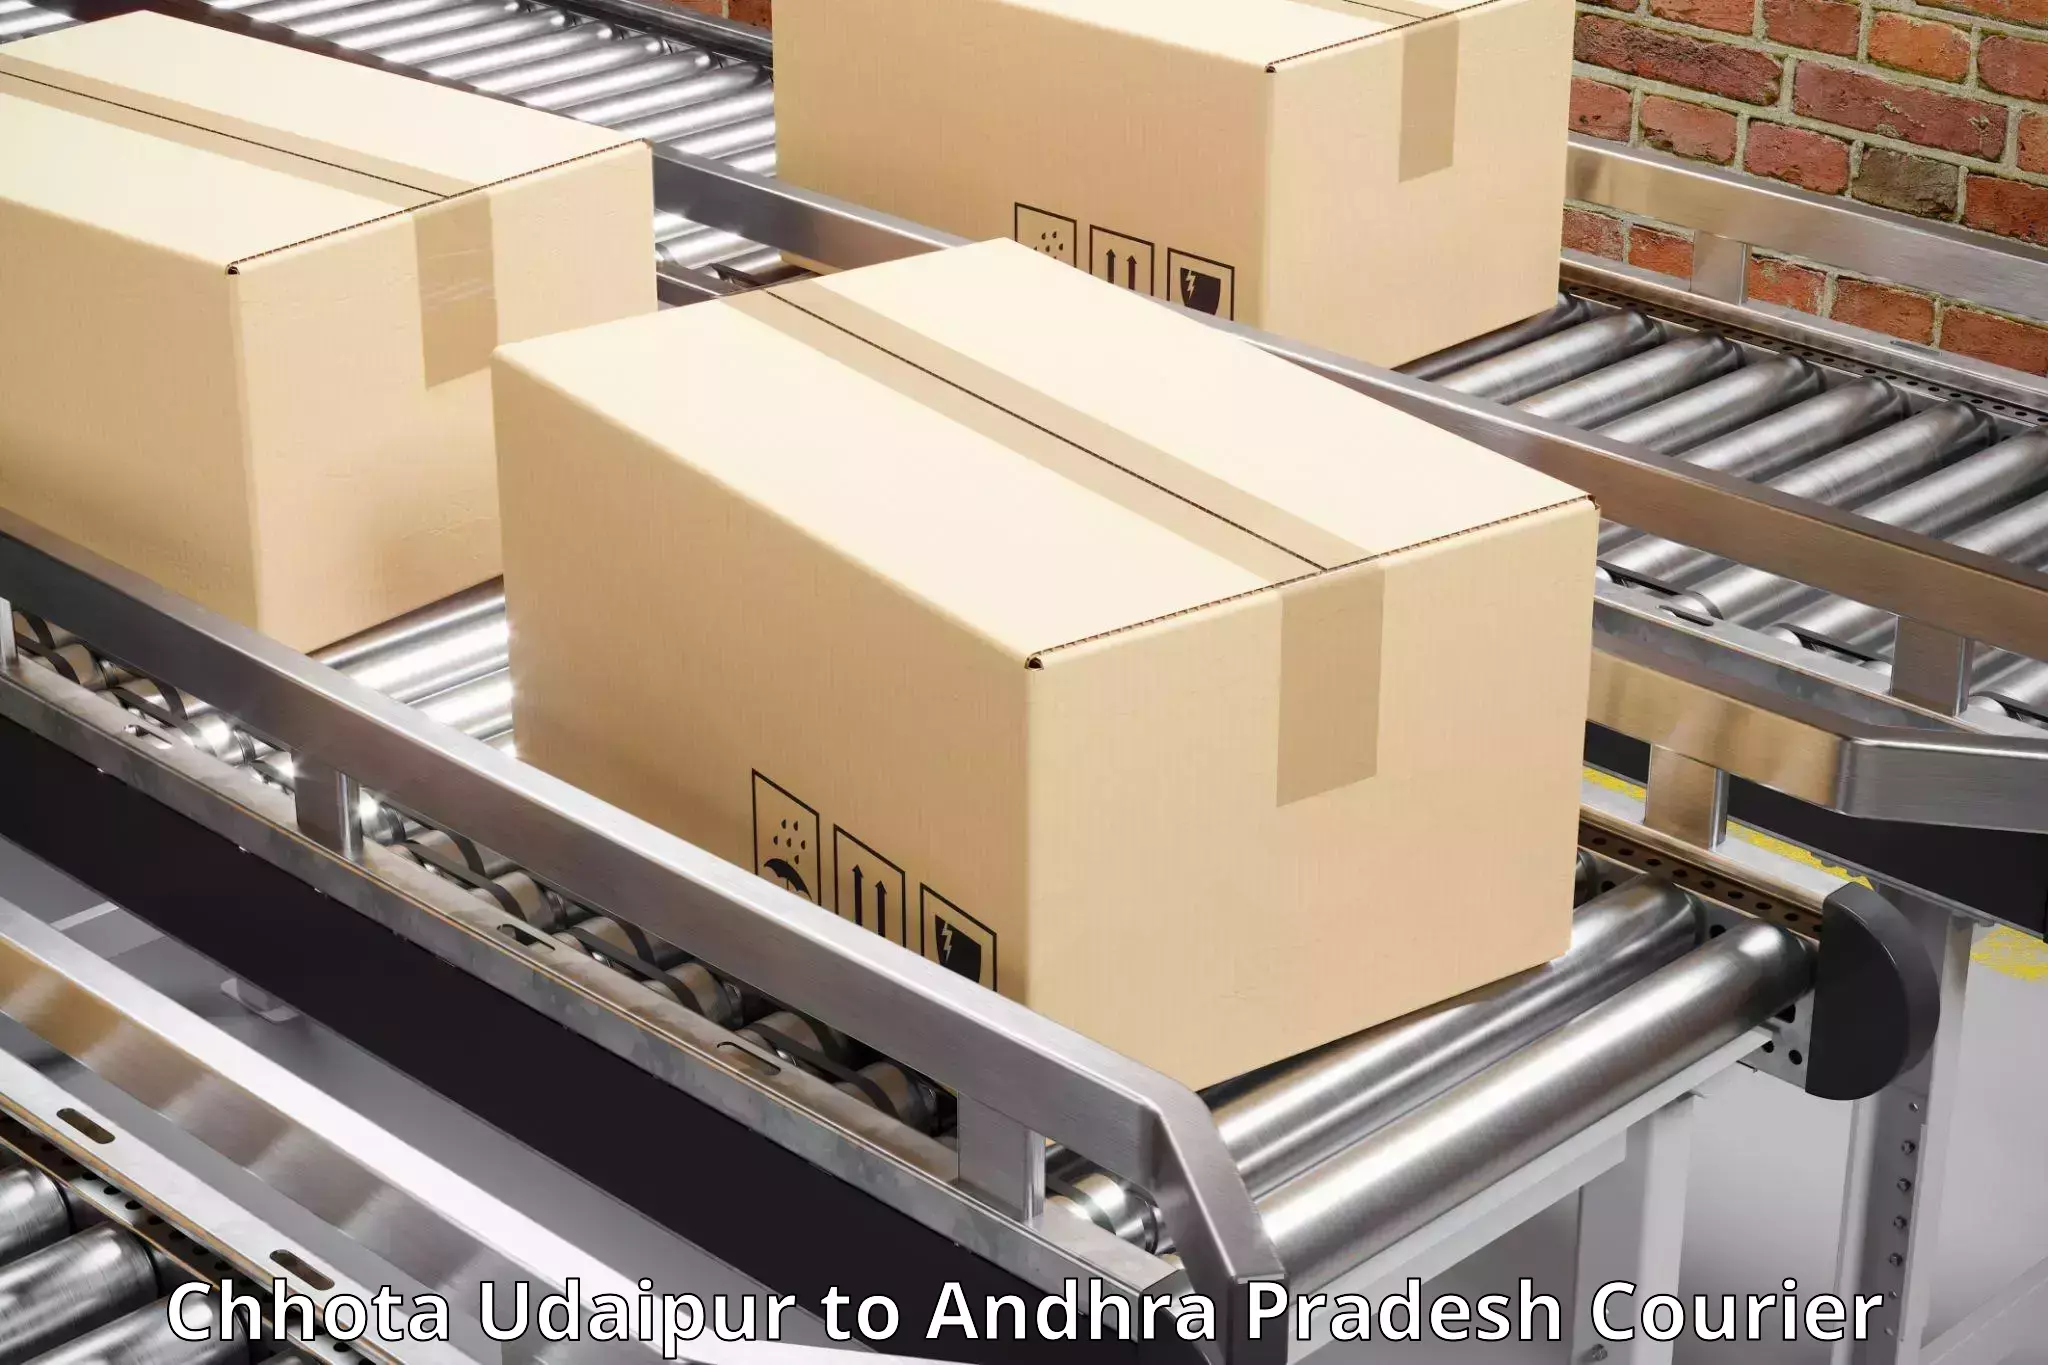 Full-service courier options Chhota Udaipur to Kavitam